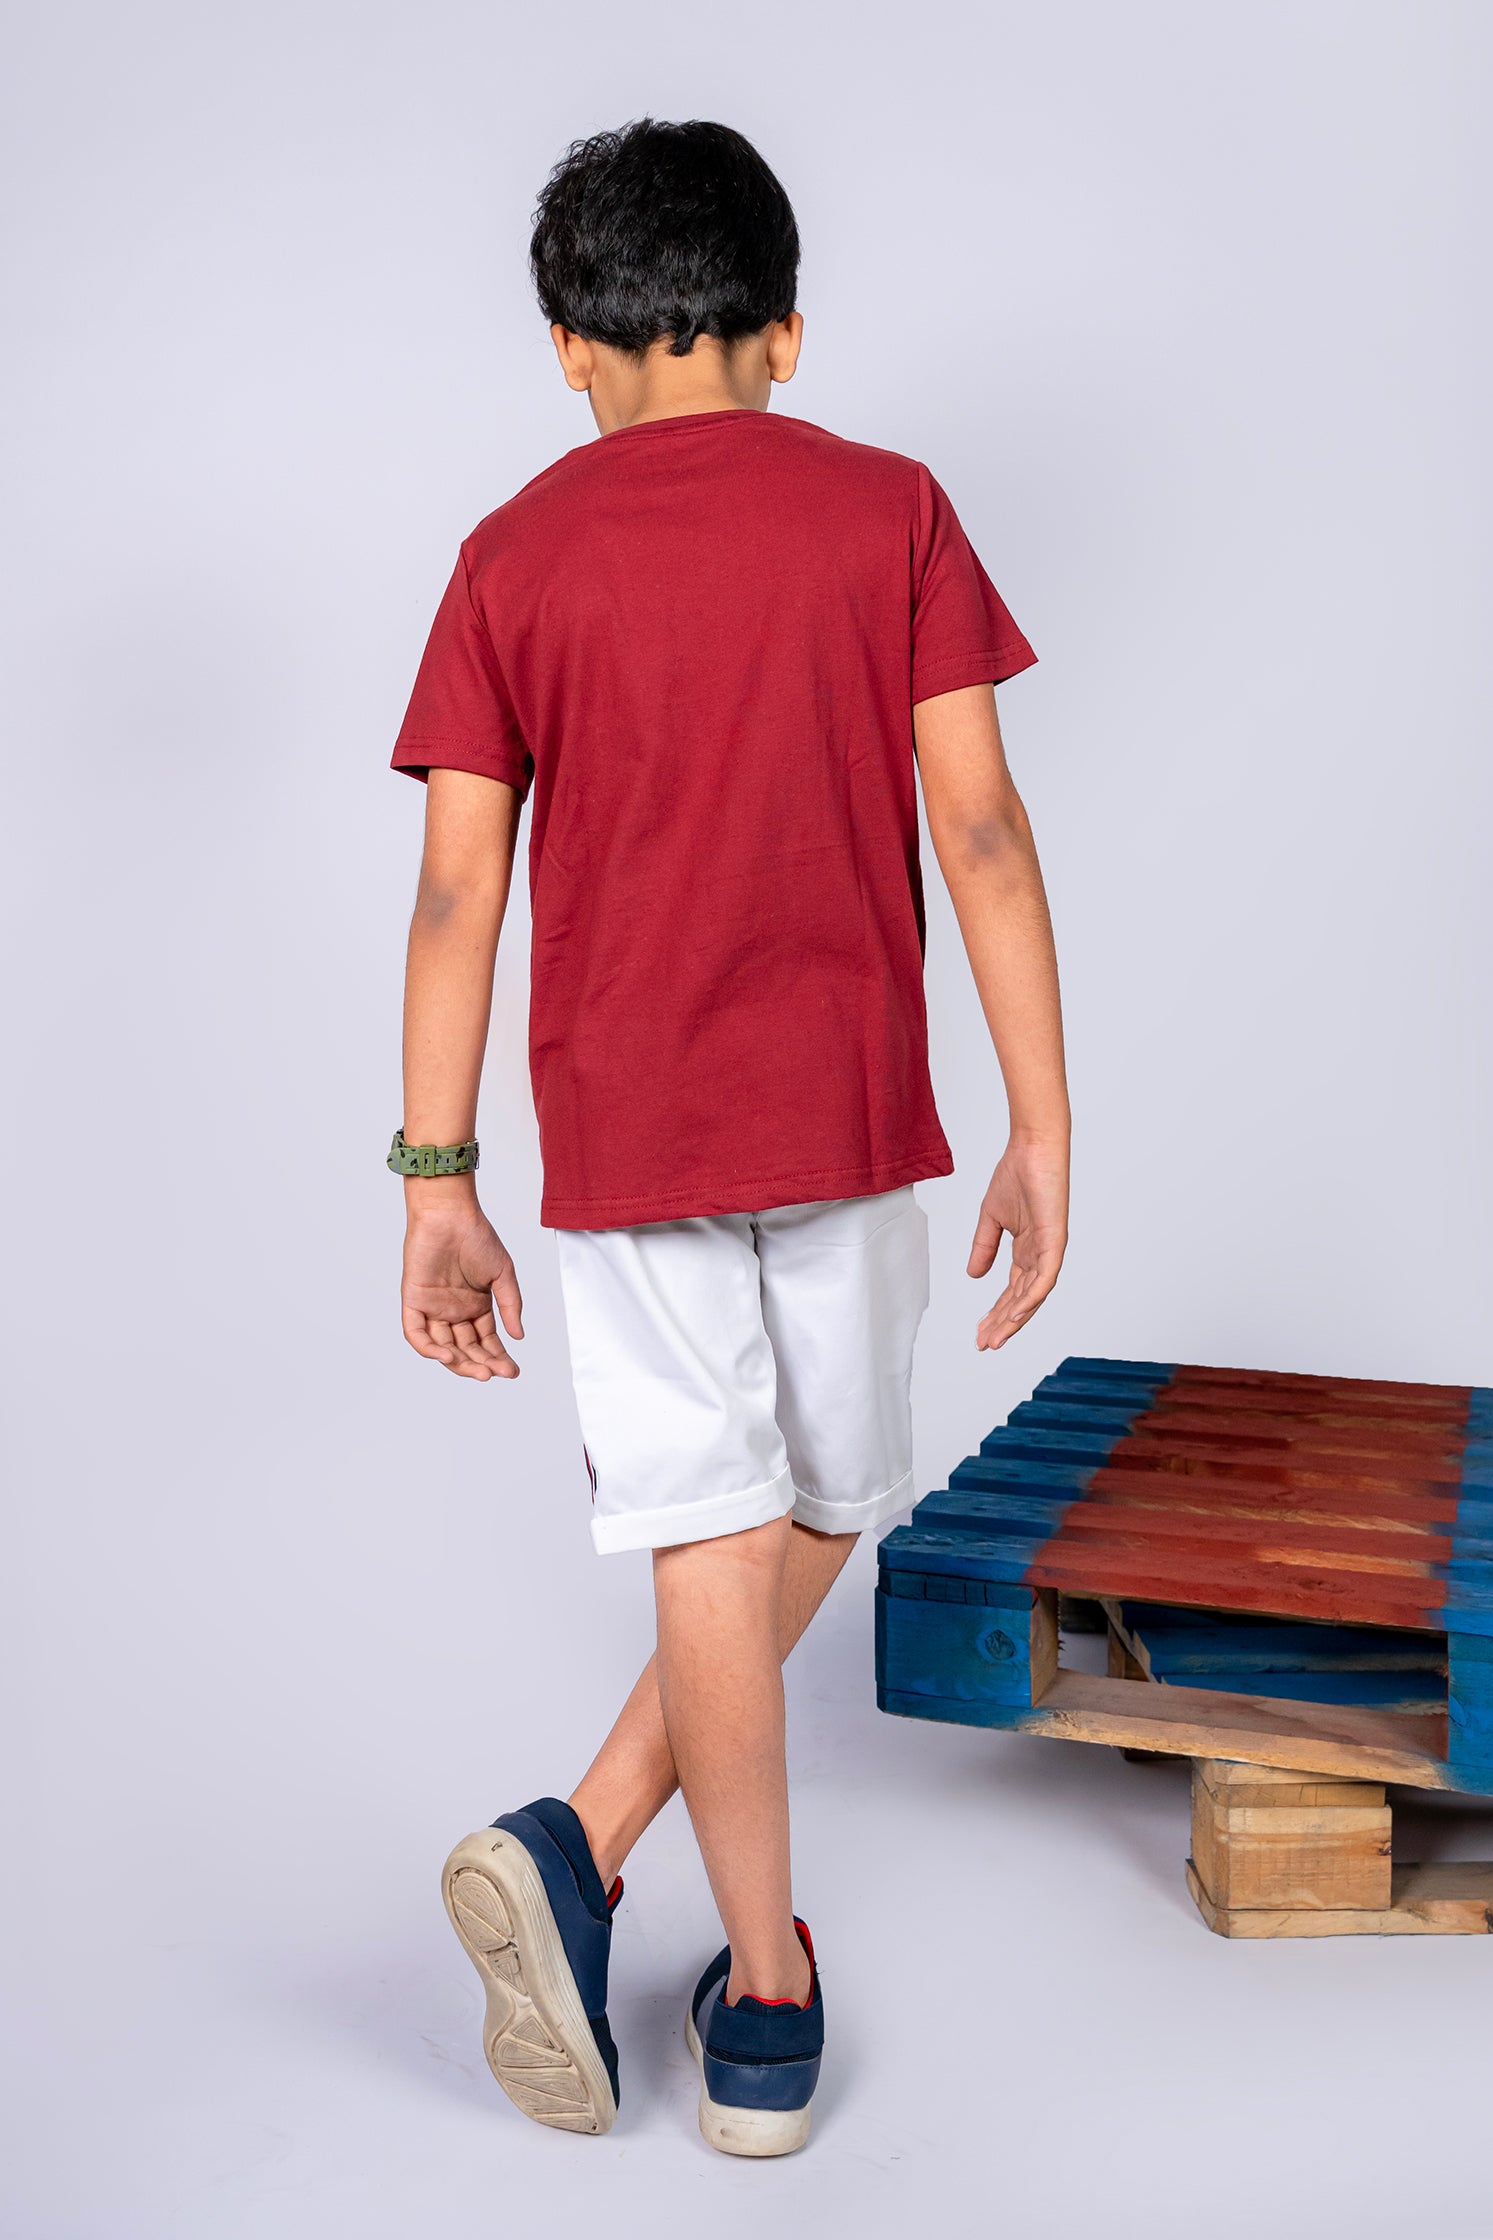 BOYS T-SHIRT FRONT MAROON WITH FRONT "PROGRESS" PRINTING